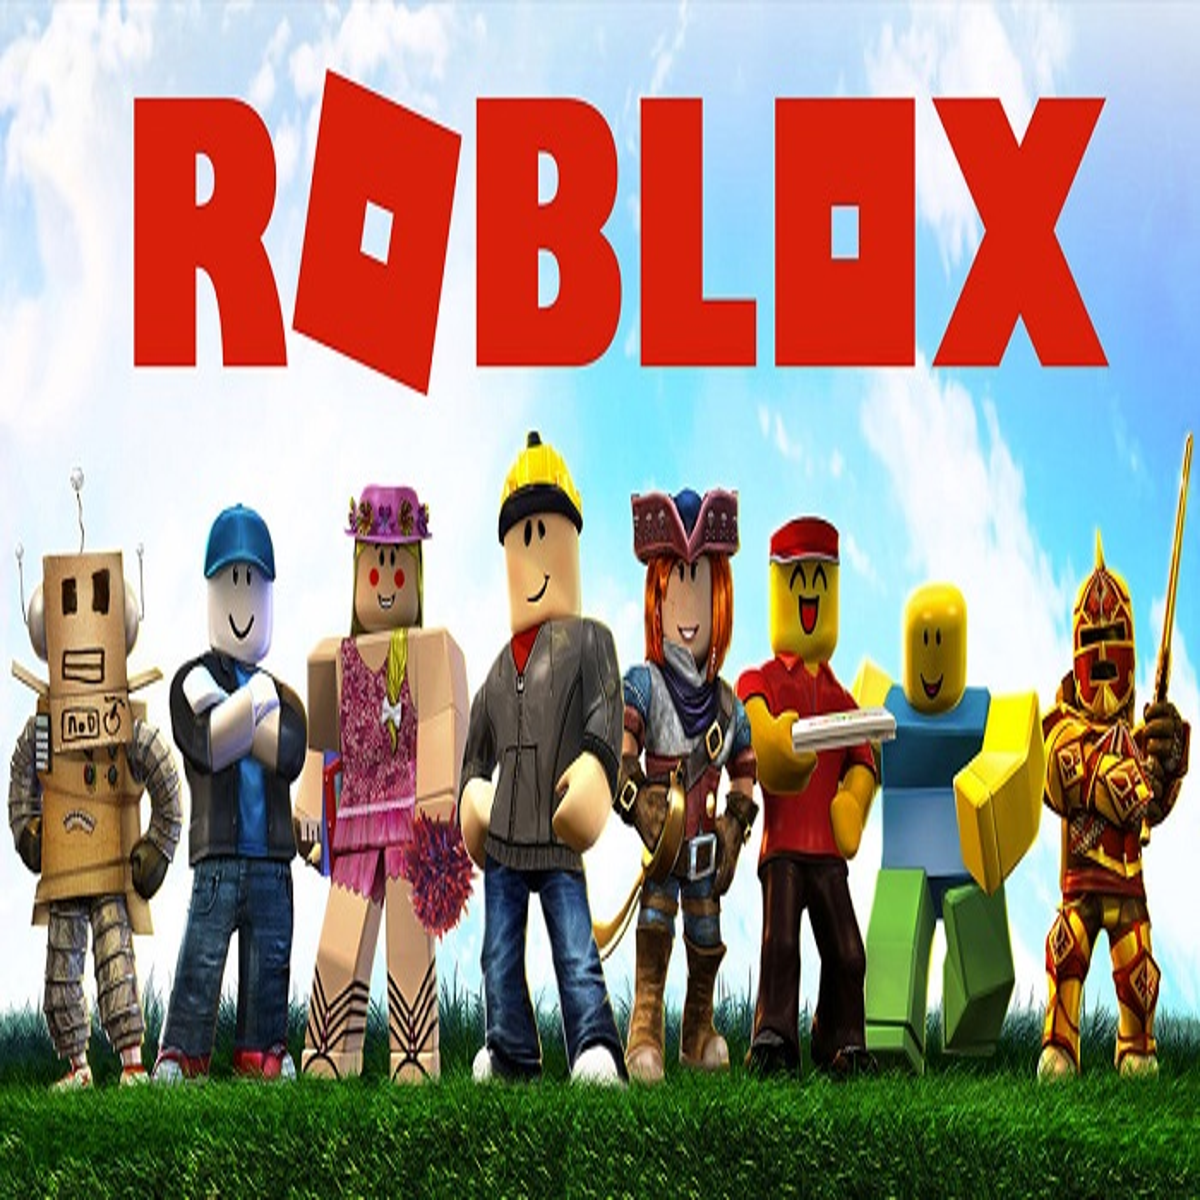 Warning for thousands of Roblox users - your account could be at